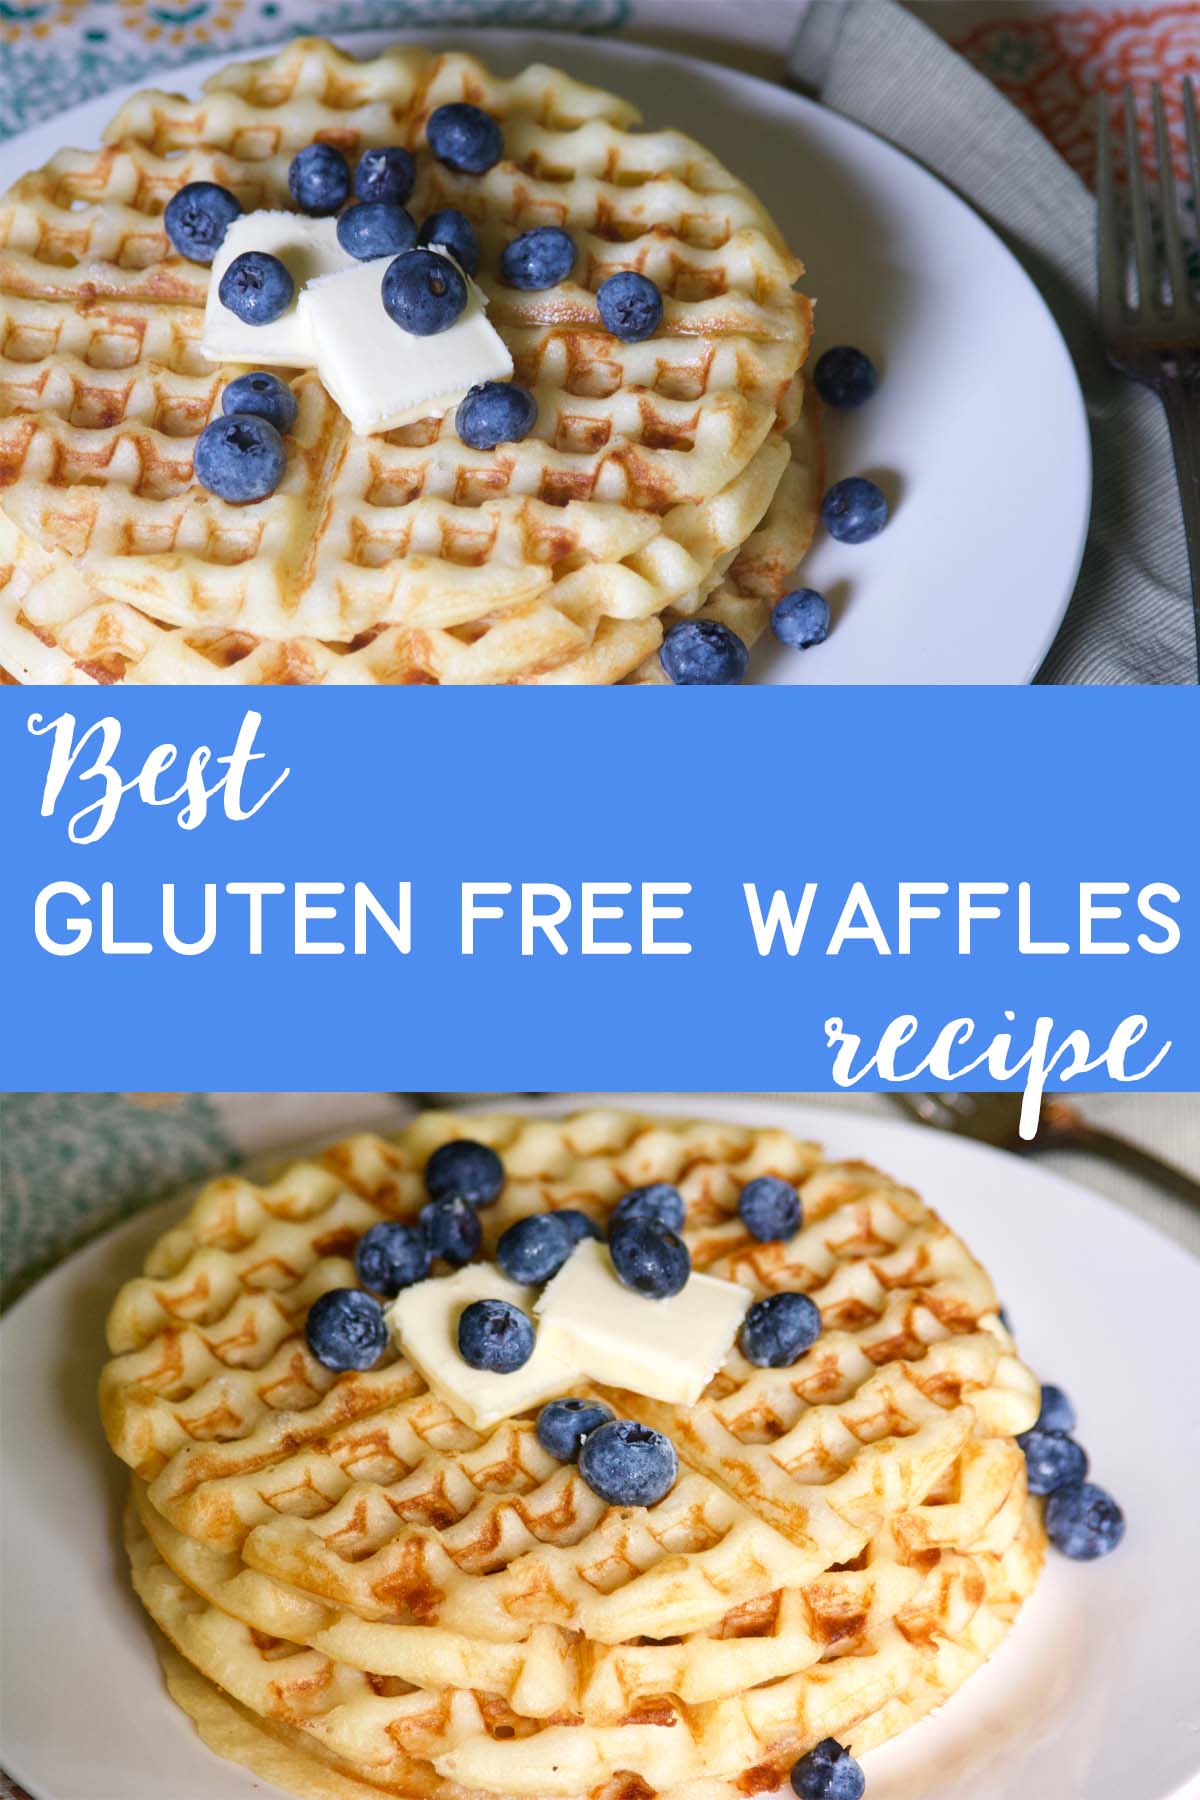 The best gluten-free waffles recipe ever! Make a batch of these at the beginning of the week and cook them up every morning for a delicious gluten-free breakfast! Top with your favorite toppings. via @lara_neves